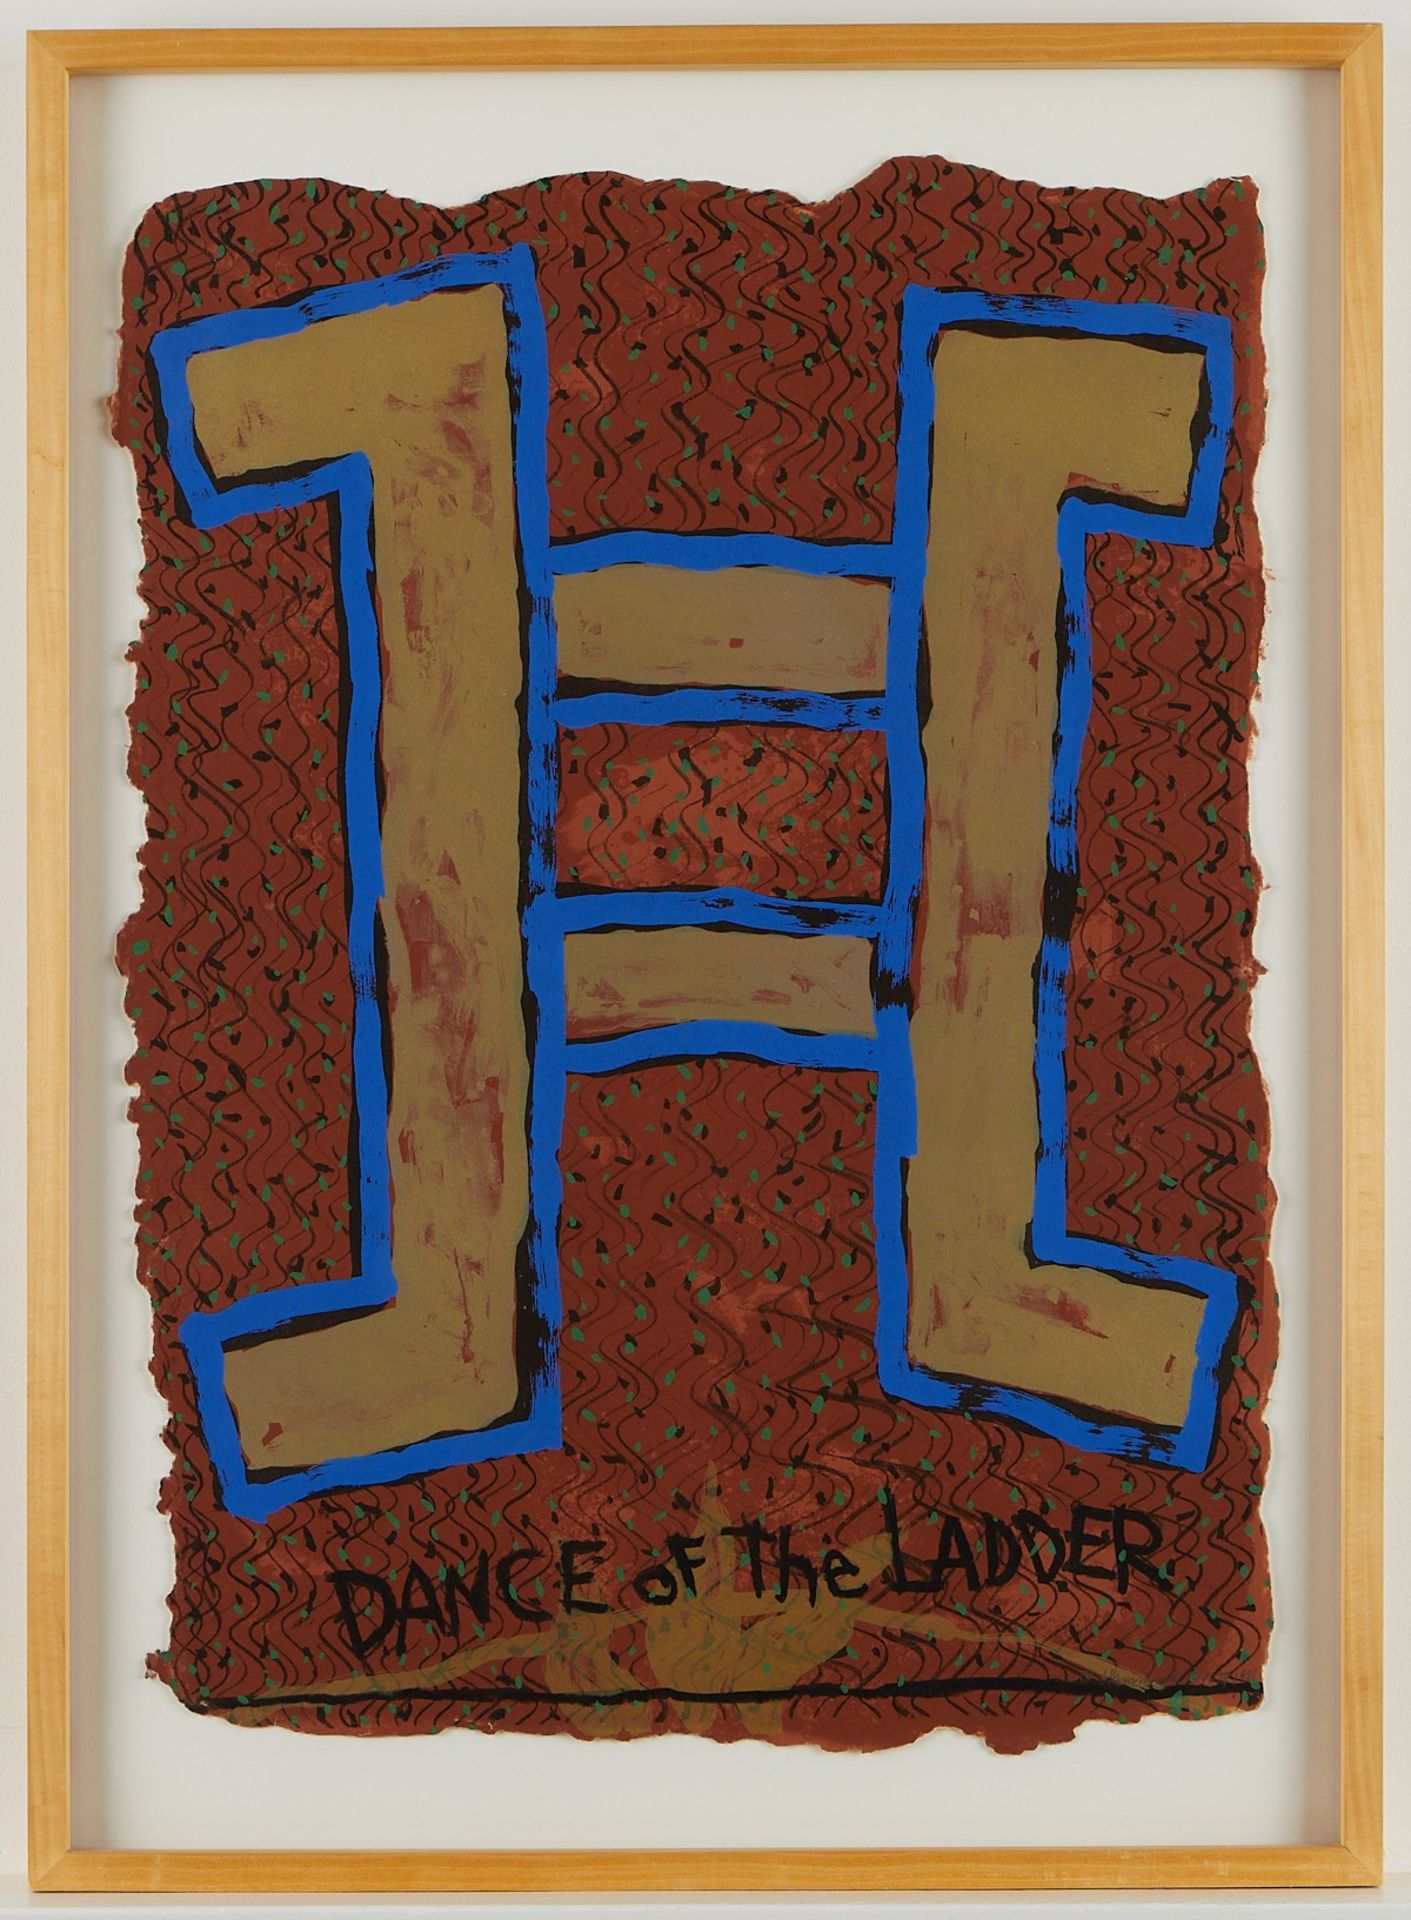 Suite 4 Harmony Hammond Dance of the Ladder Prints - Image 16 of 18